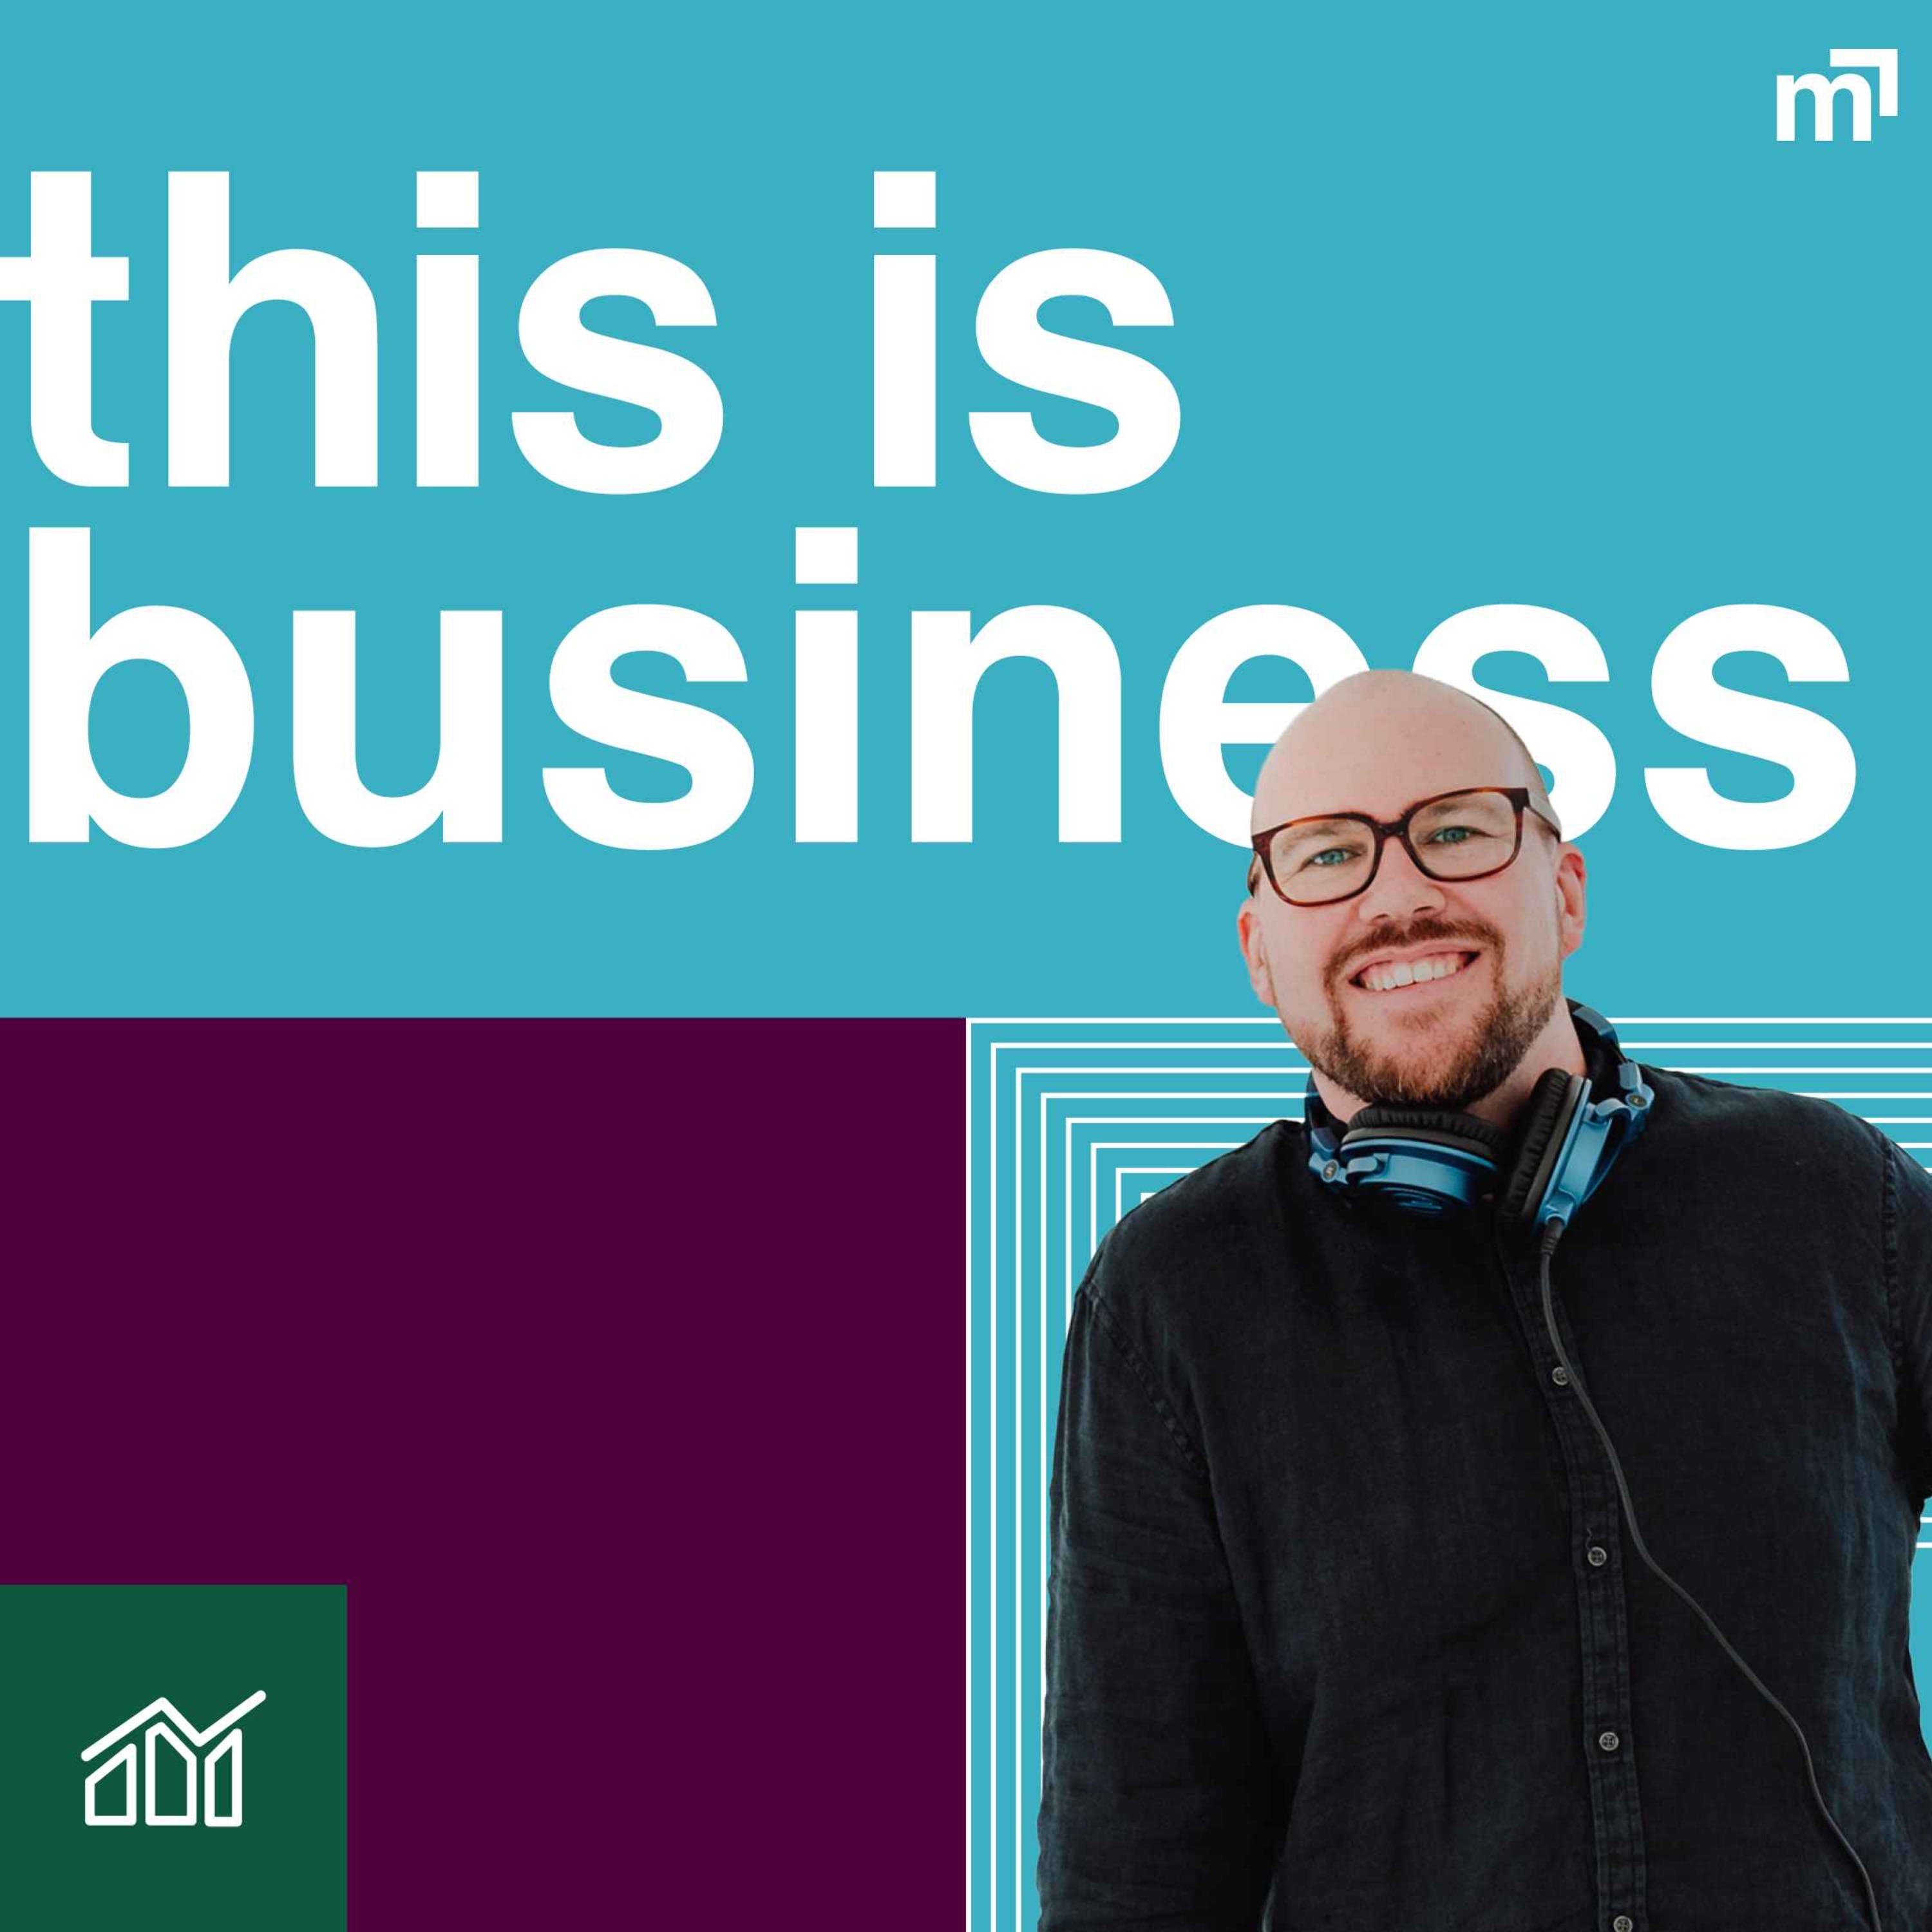 starting a biz 101 (getting an ABN, registering a business name, invoicing, GST + more)